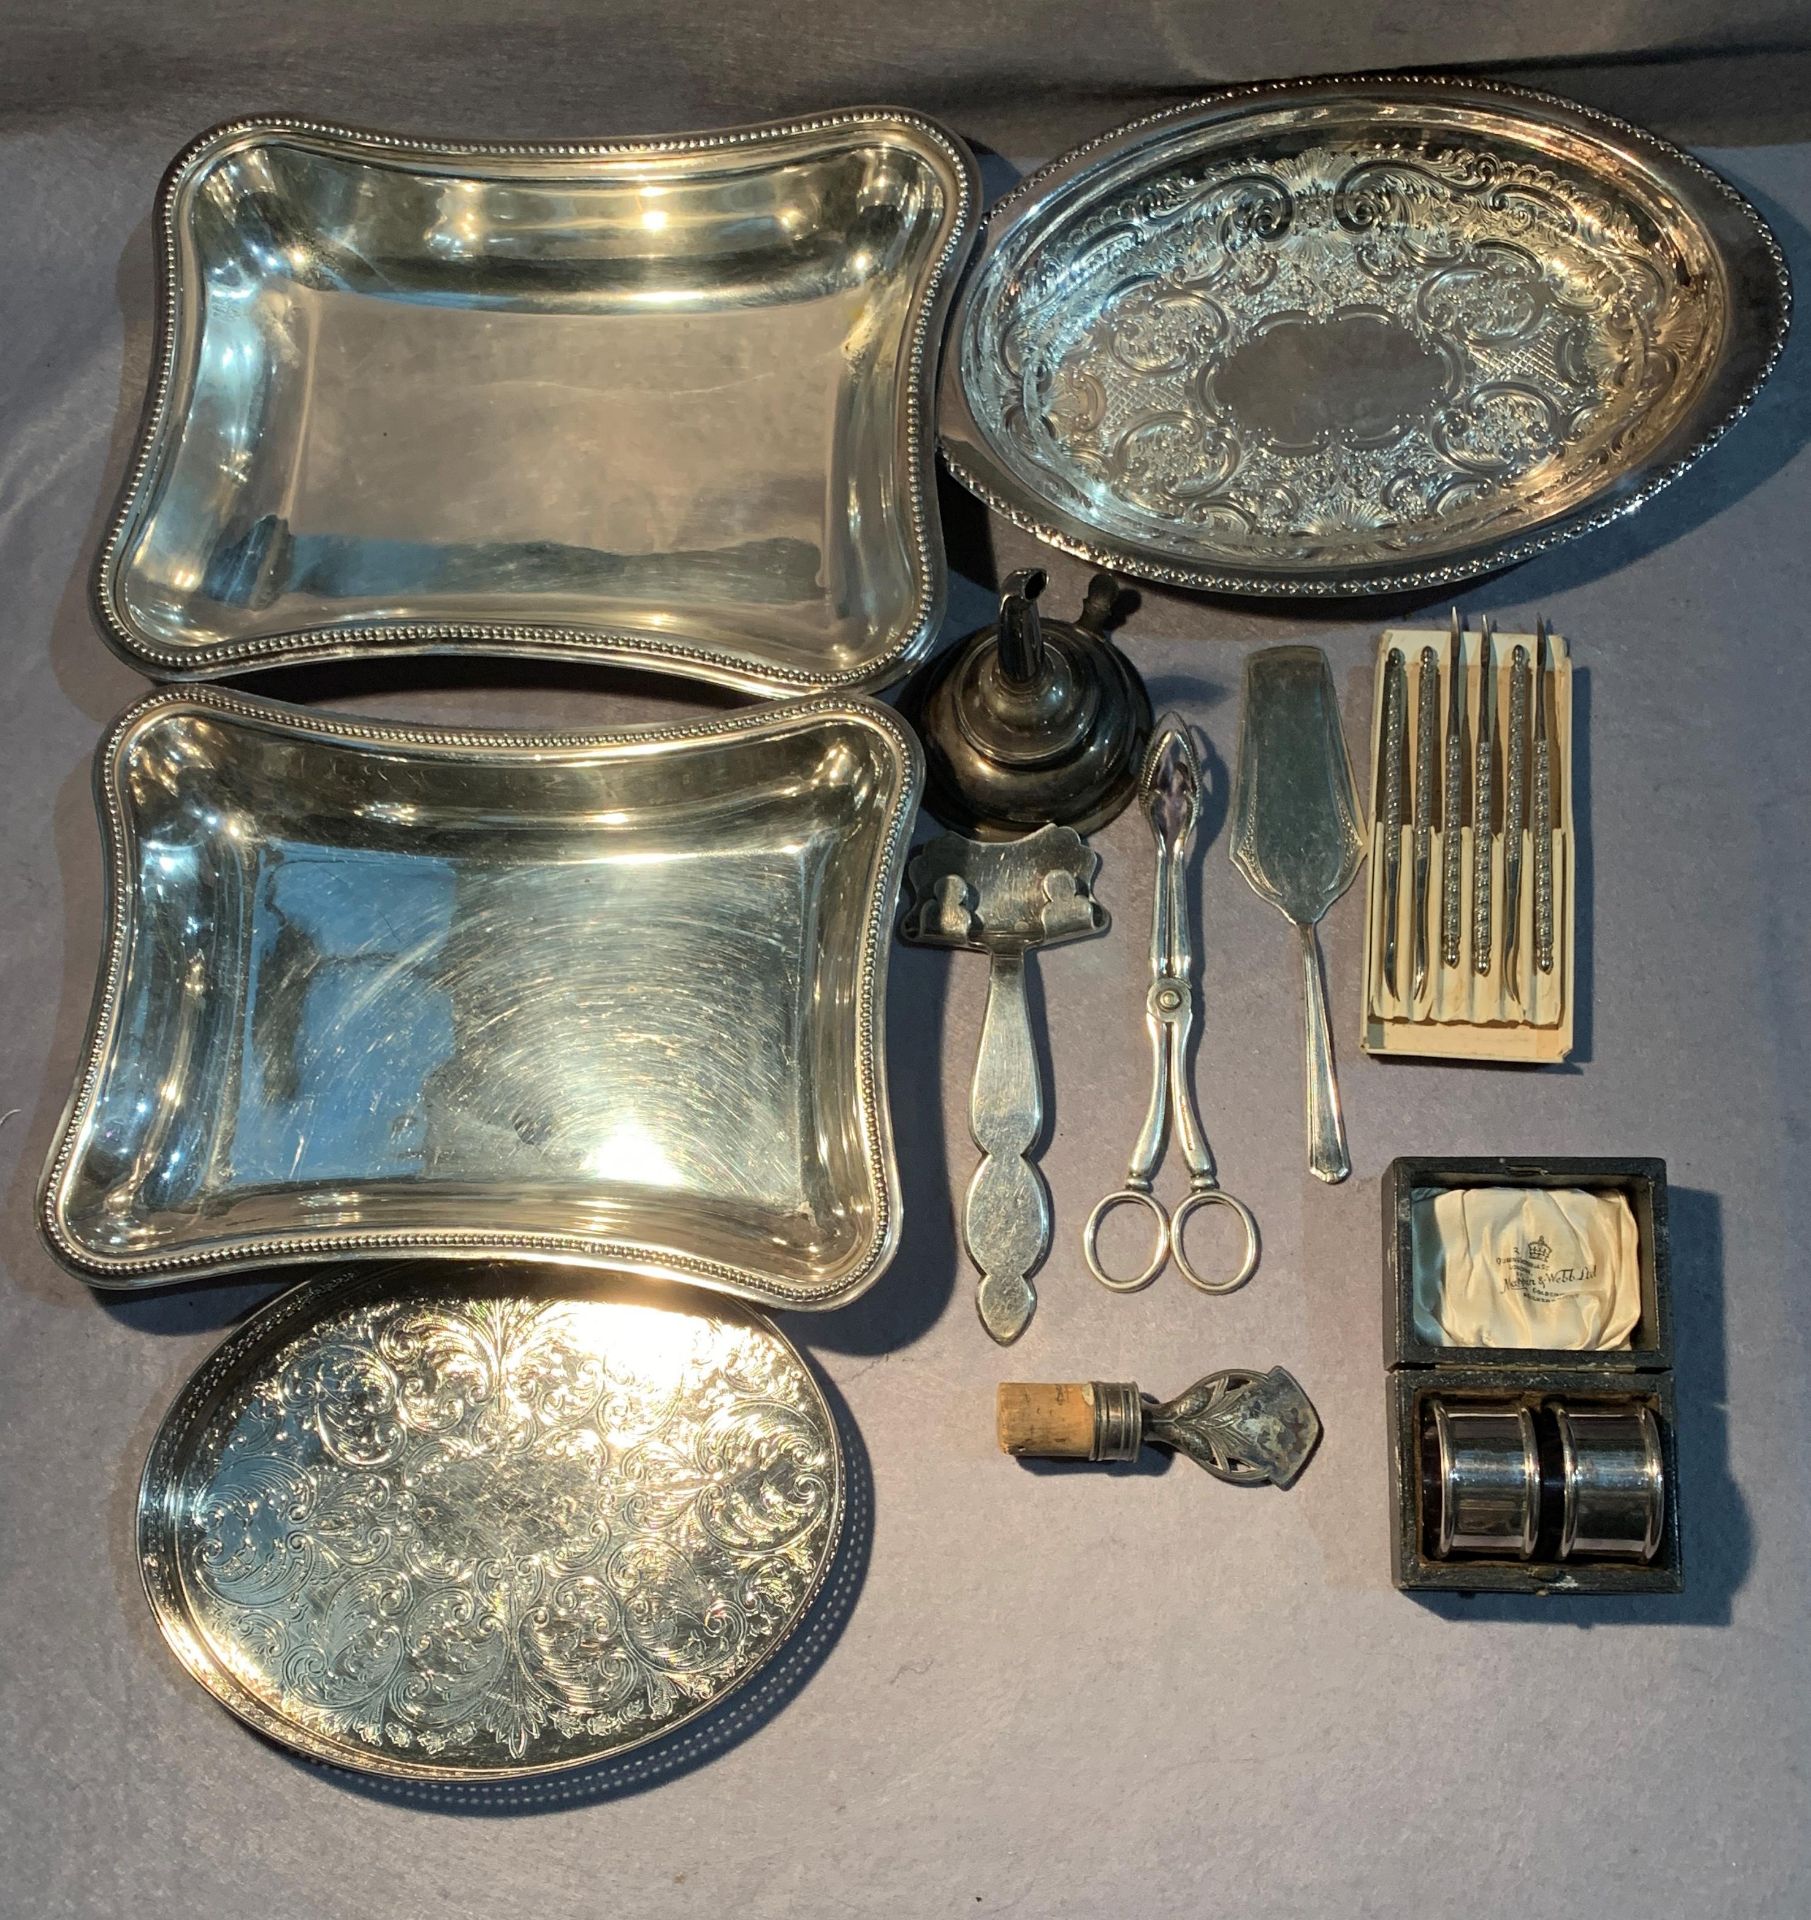 Contents to lid - plated dishes, wine funnel, etc. - Image 2 of 2